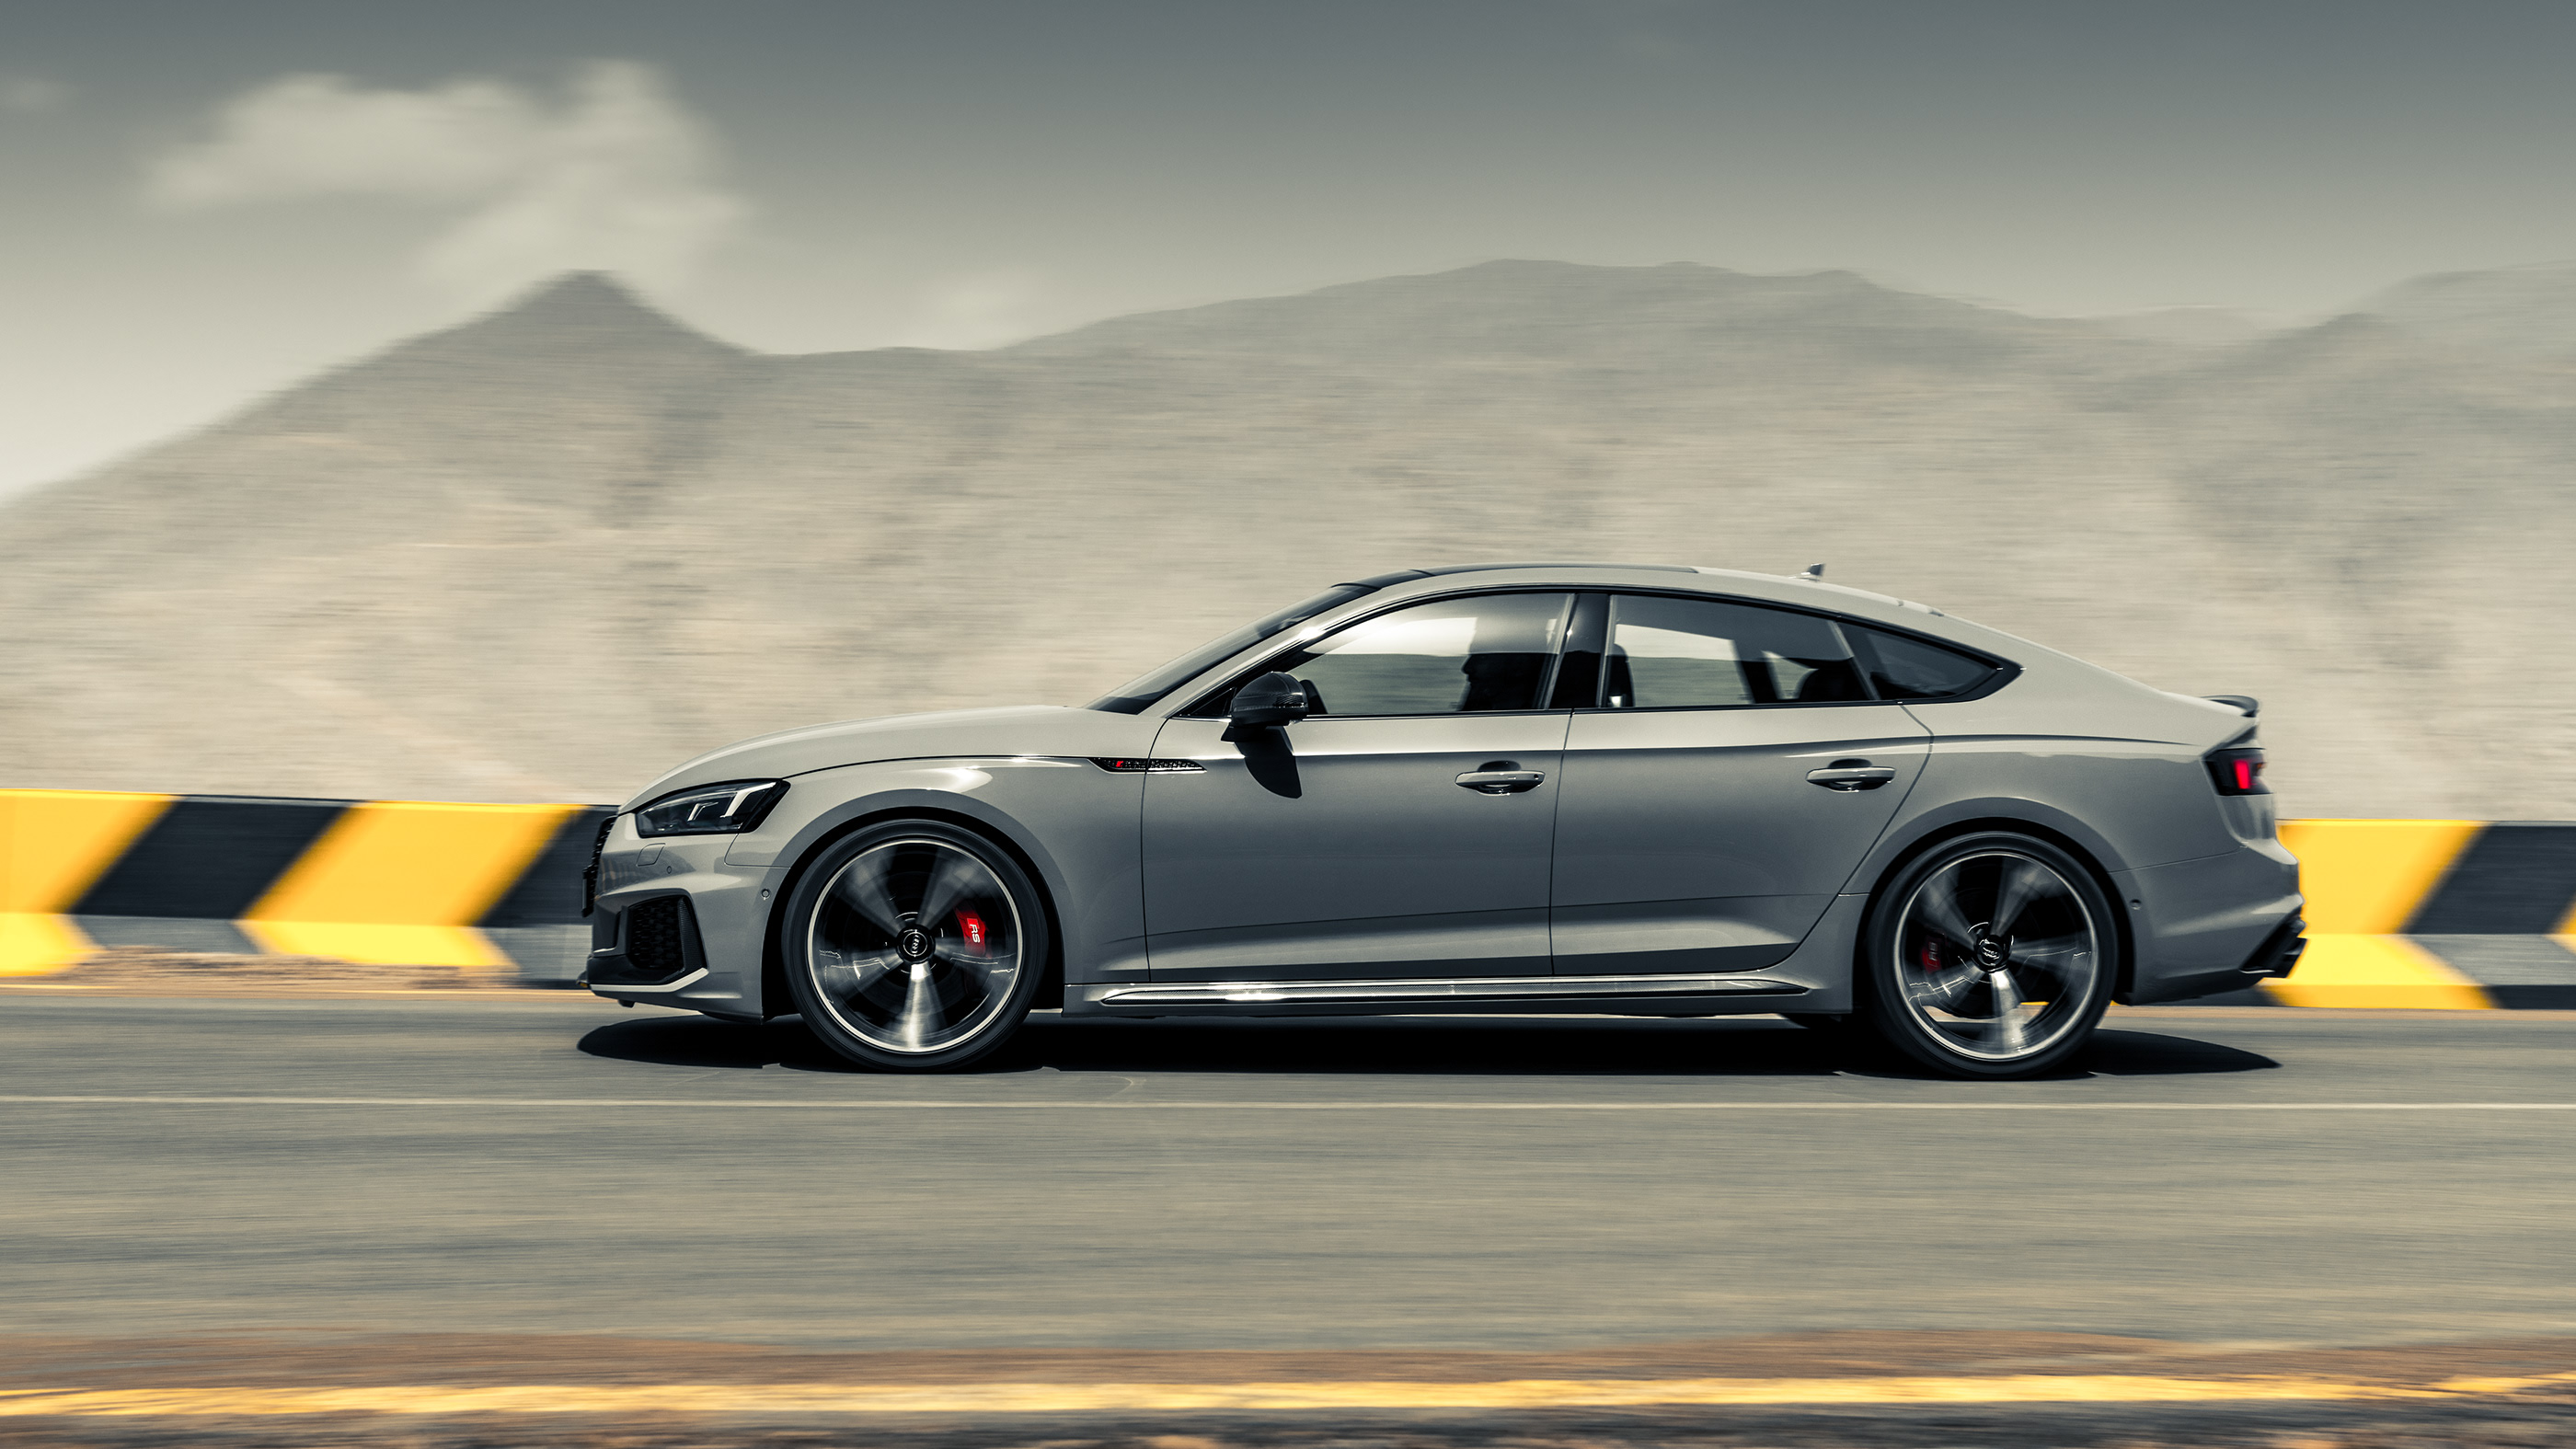 Audi RS5 HD Wallpaper | Background Image | 2800x1575